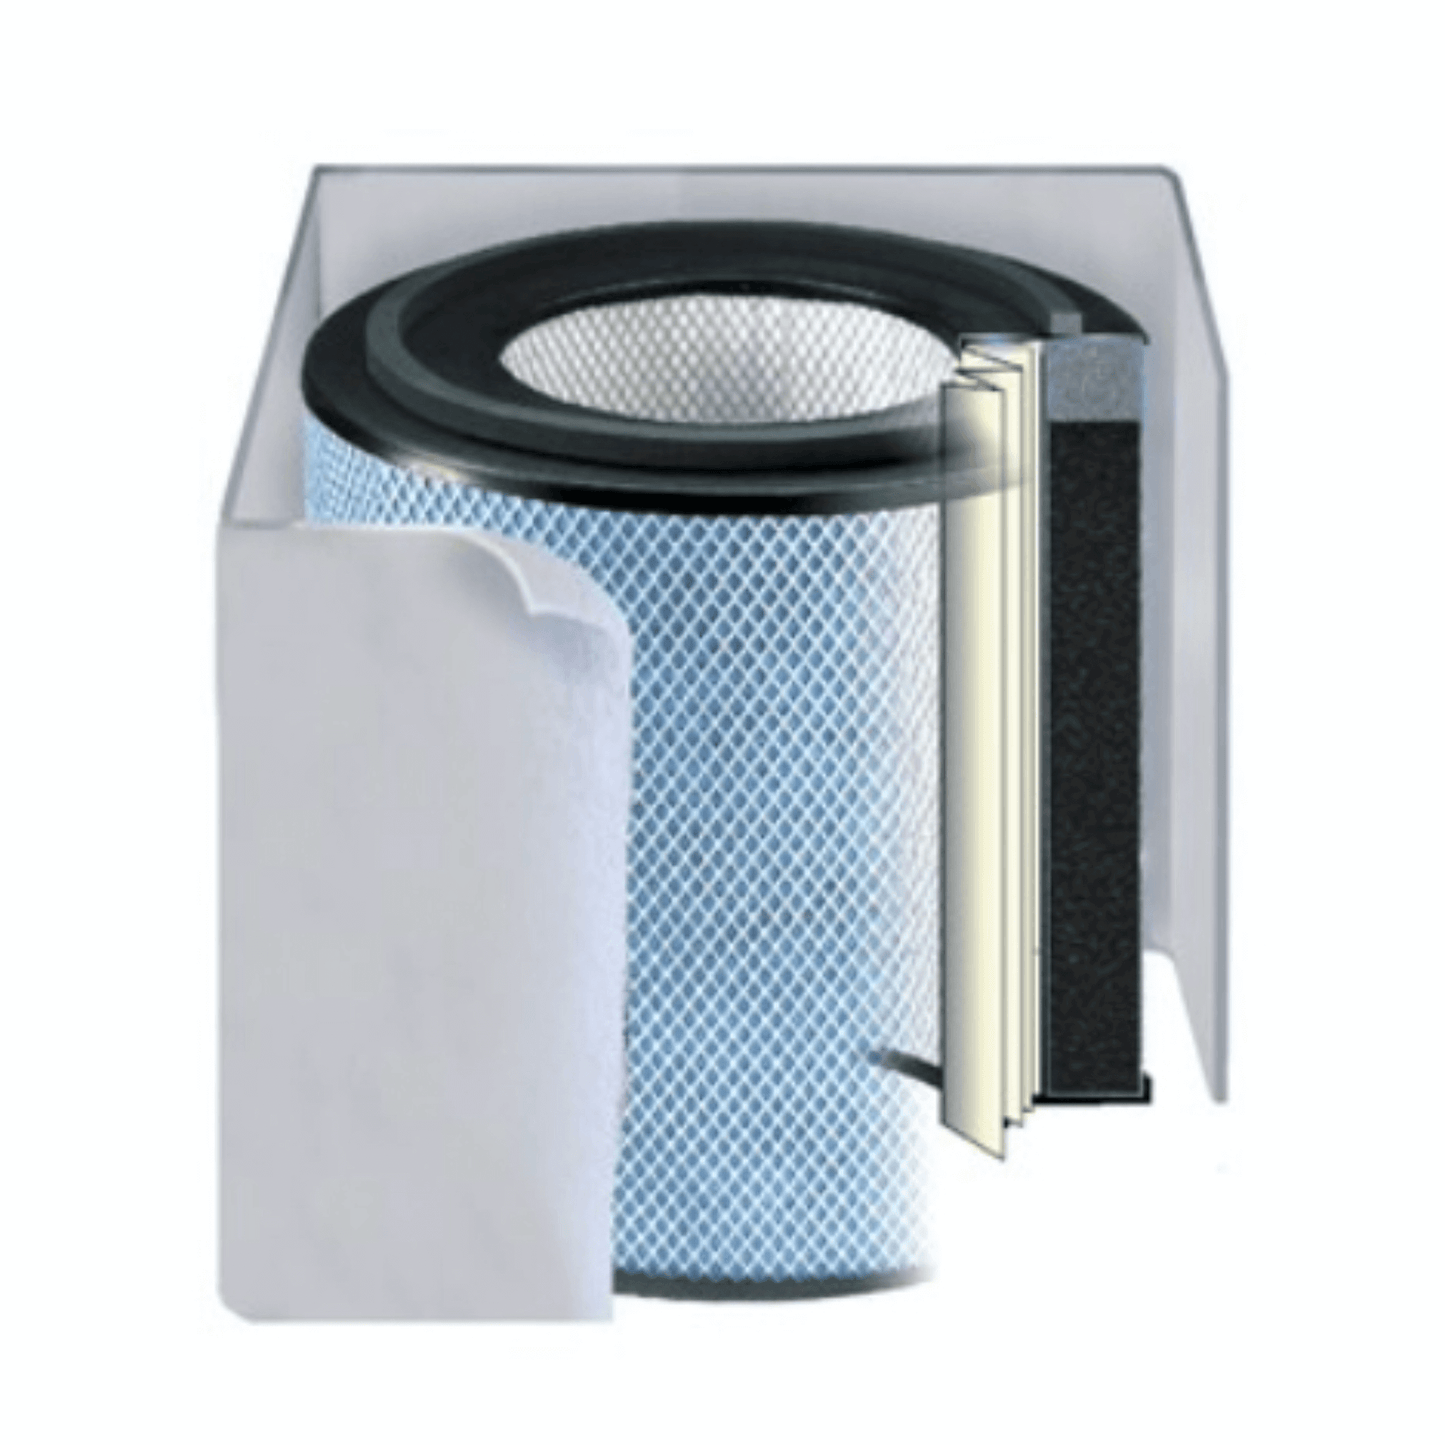 Austin Air HealthMate Replacement Filter - White